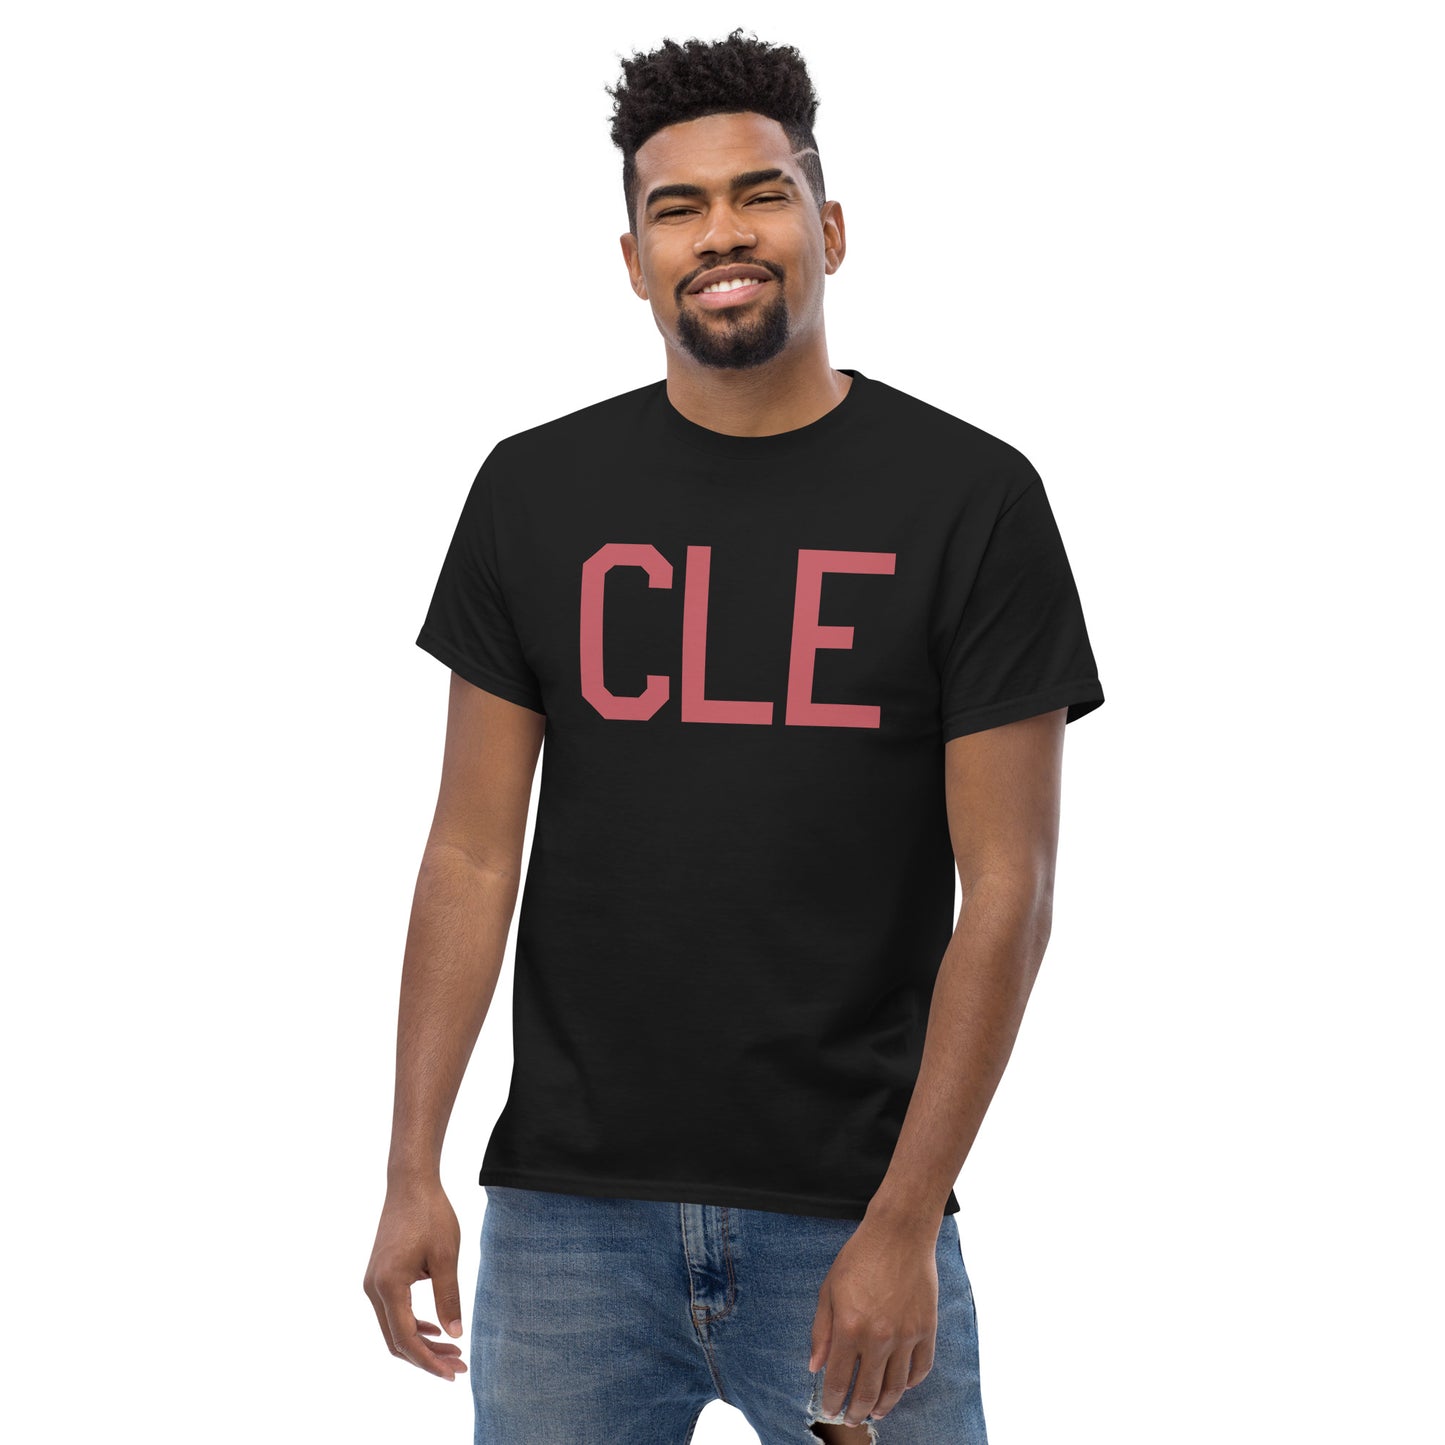 Aviation Enthusiast Men's Tee - Deep Pink Graphic • CLE Cleveland • YHM Designs - Image 06